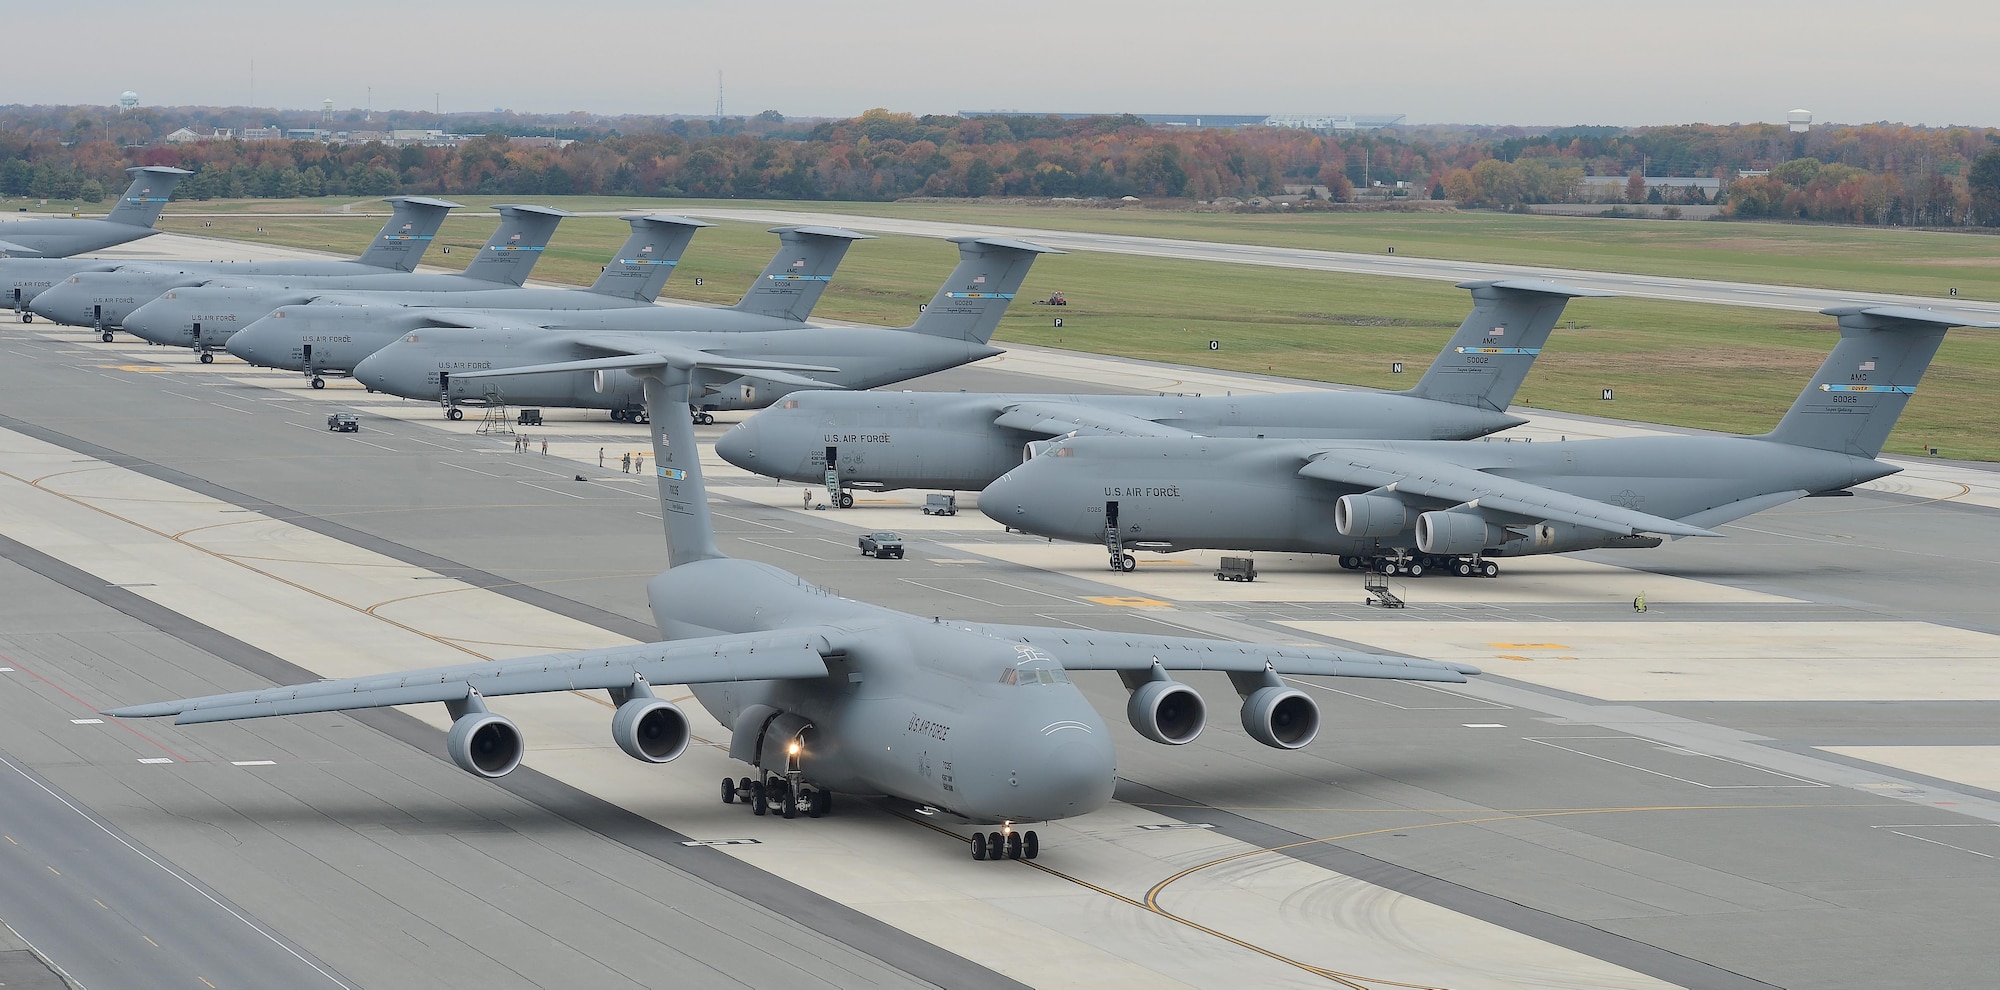 A C-5M Super Galaxy aircraft taxis with other C-5Ms in the background Nov. 2, 2015, at Dover Air Force Base, Del. Dover is home to the Air Forces’ only isochronal maintenance facility for C-5 aircraft, some of which were experiencing smoke in the cockpit after completing ISO maintenance. Experts from Dover’s 436th Maintenance Squadron created a low-cost piece of equipment that has fixed the problem and is in the process of being implemented Air Force-wide. (U.S. Air Force photo/Greg L. Davis)